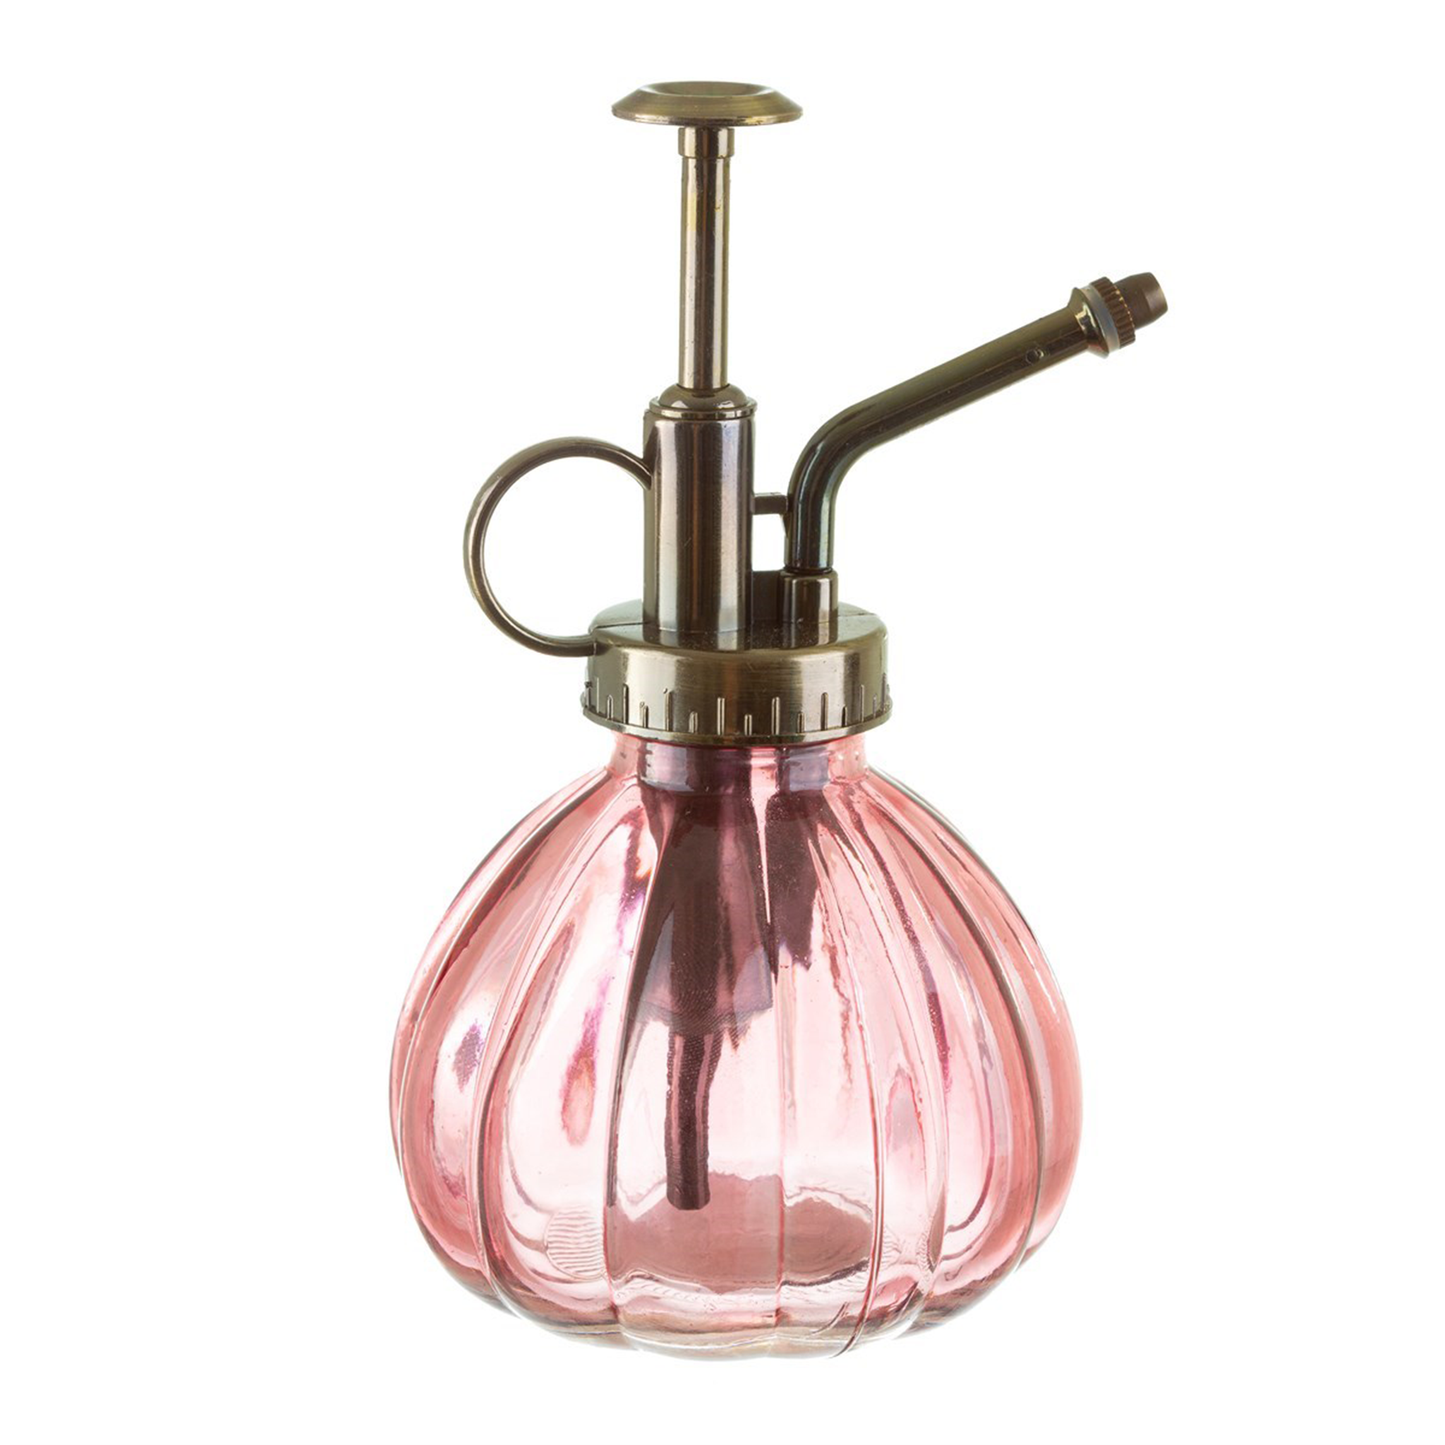 a pink glass mister with bronze hardware